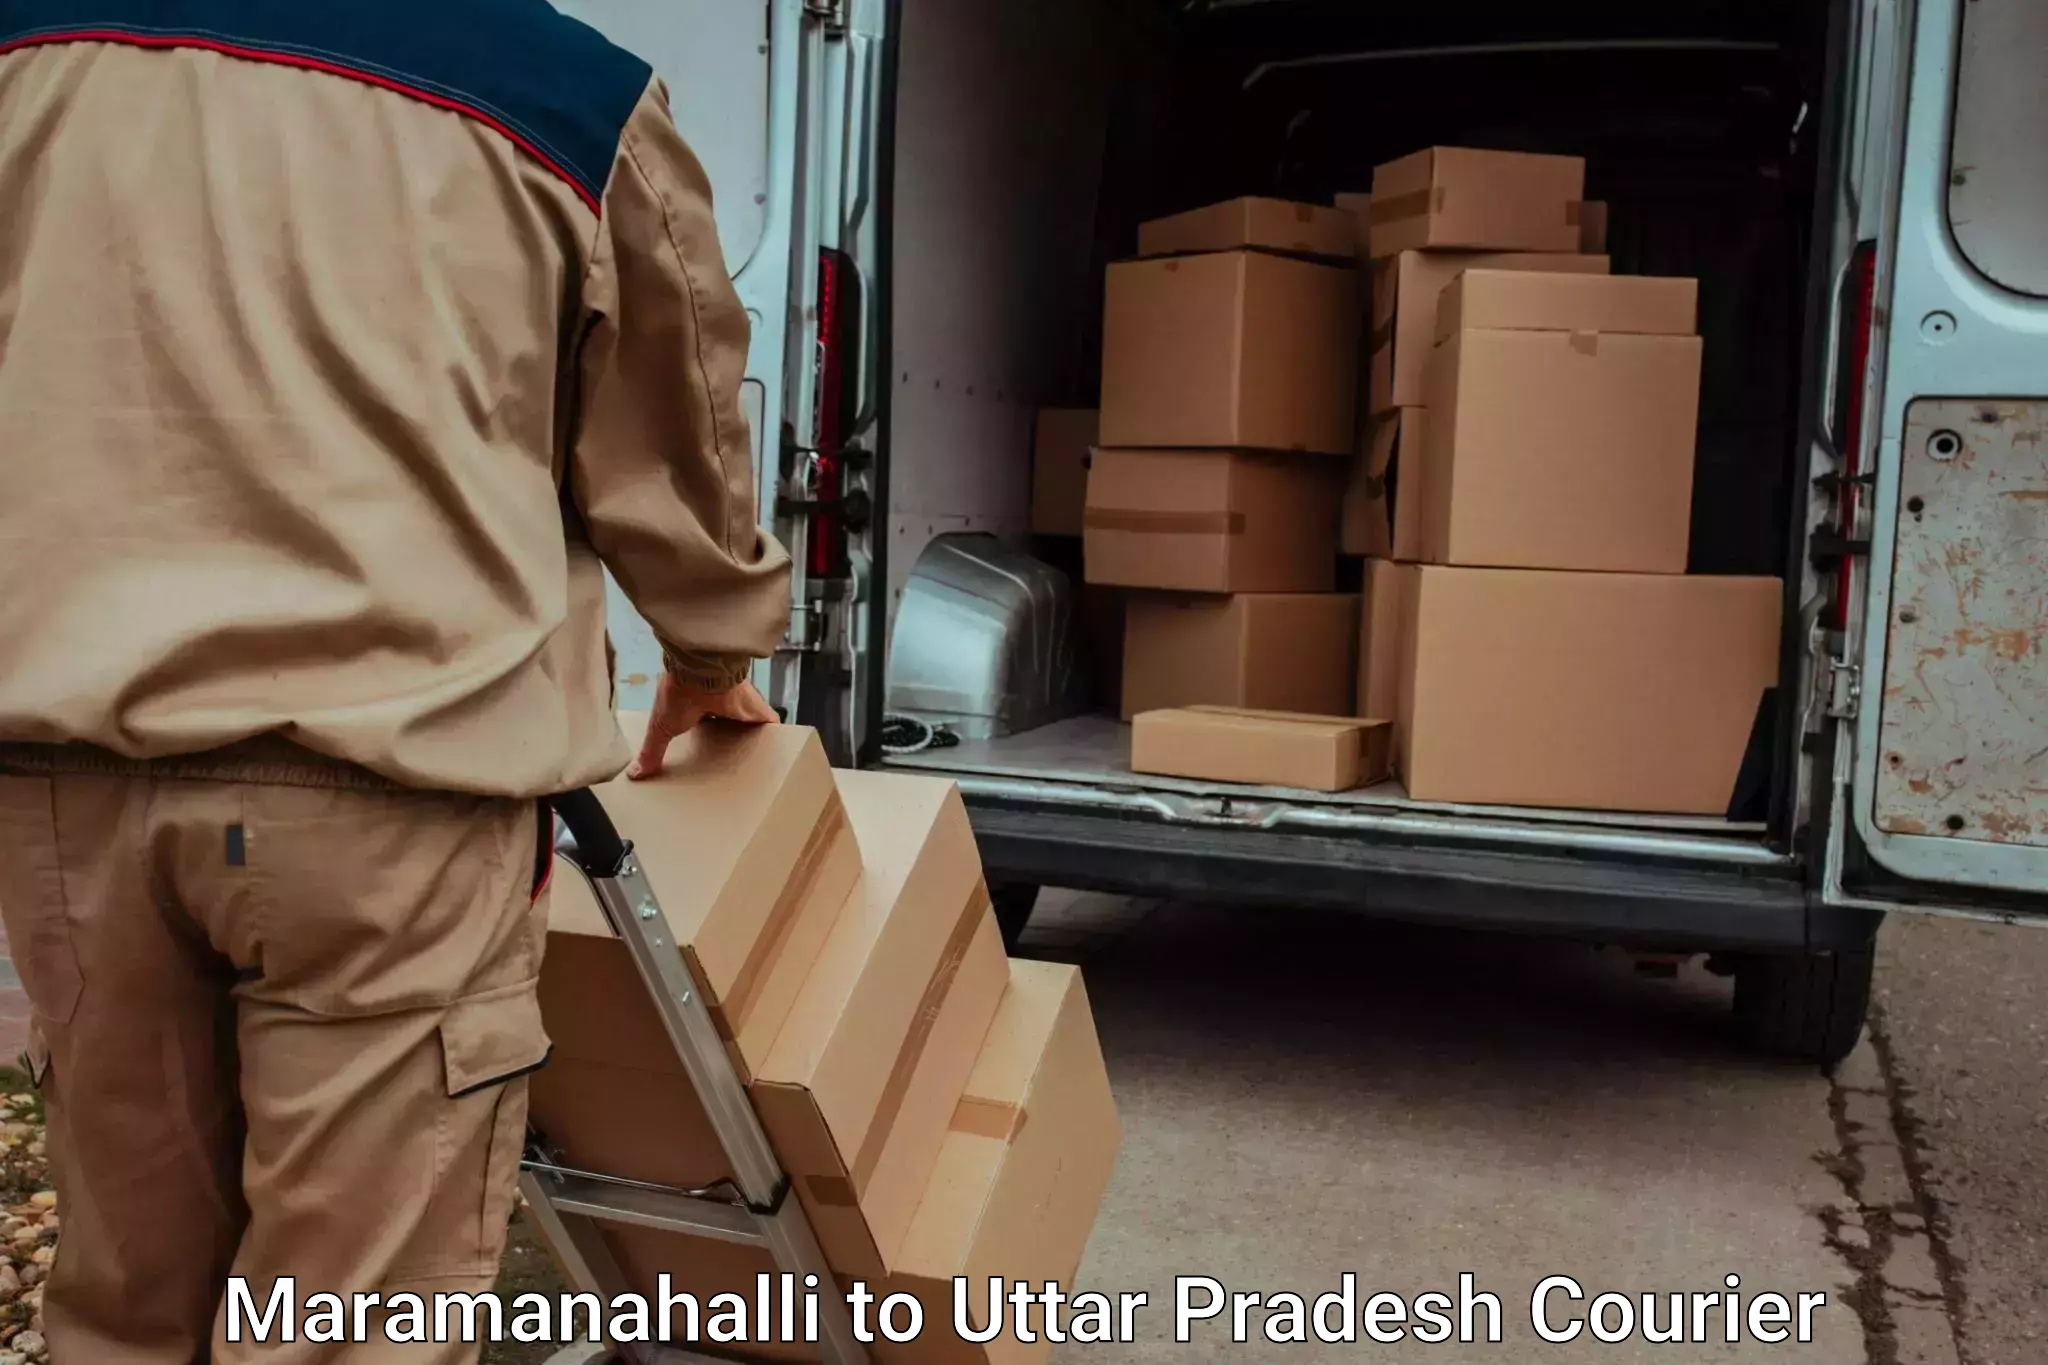 Baggage relocation service in Maramanahalli to Ayodhya